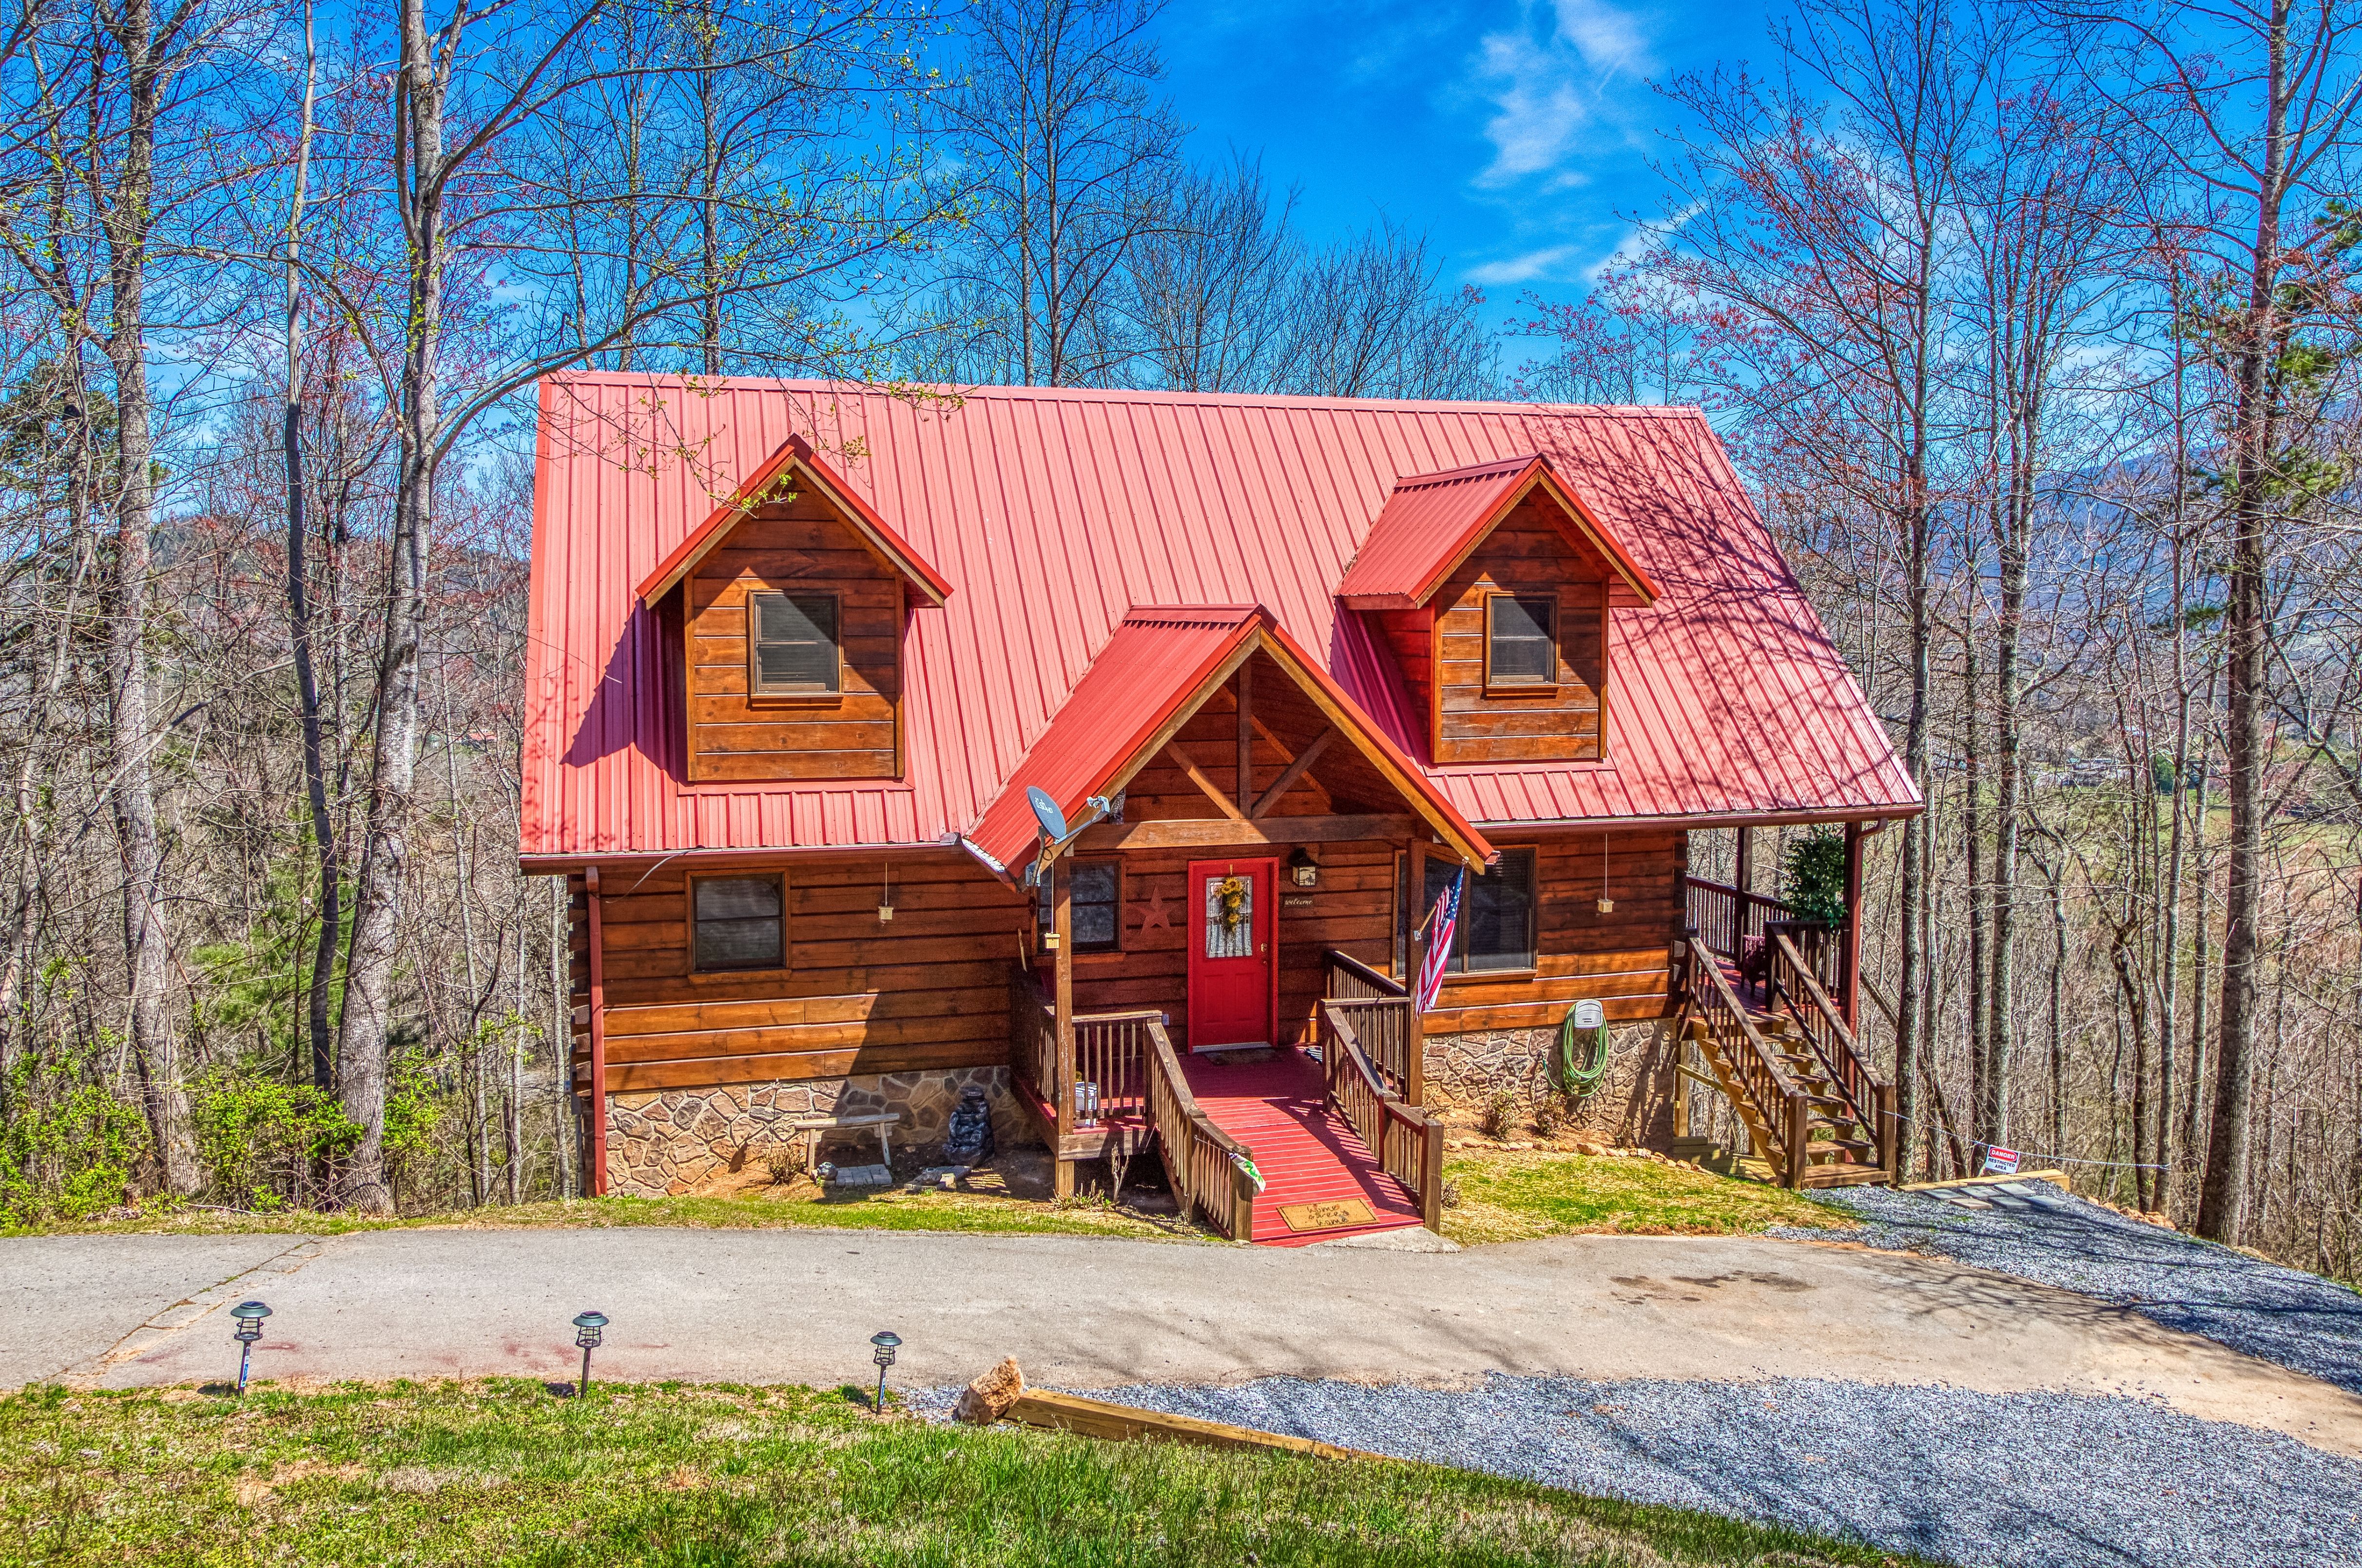 Moonlight Magic | RE/MAX Cove Mountain Realty & Cabins